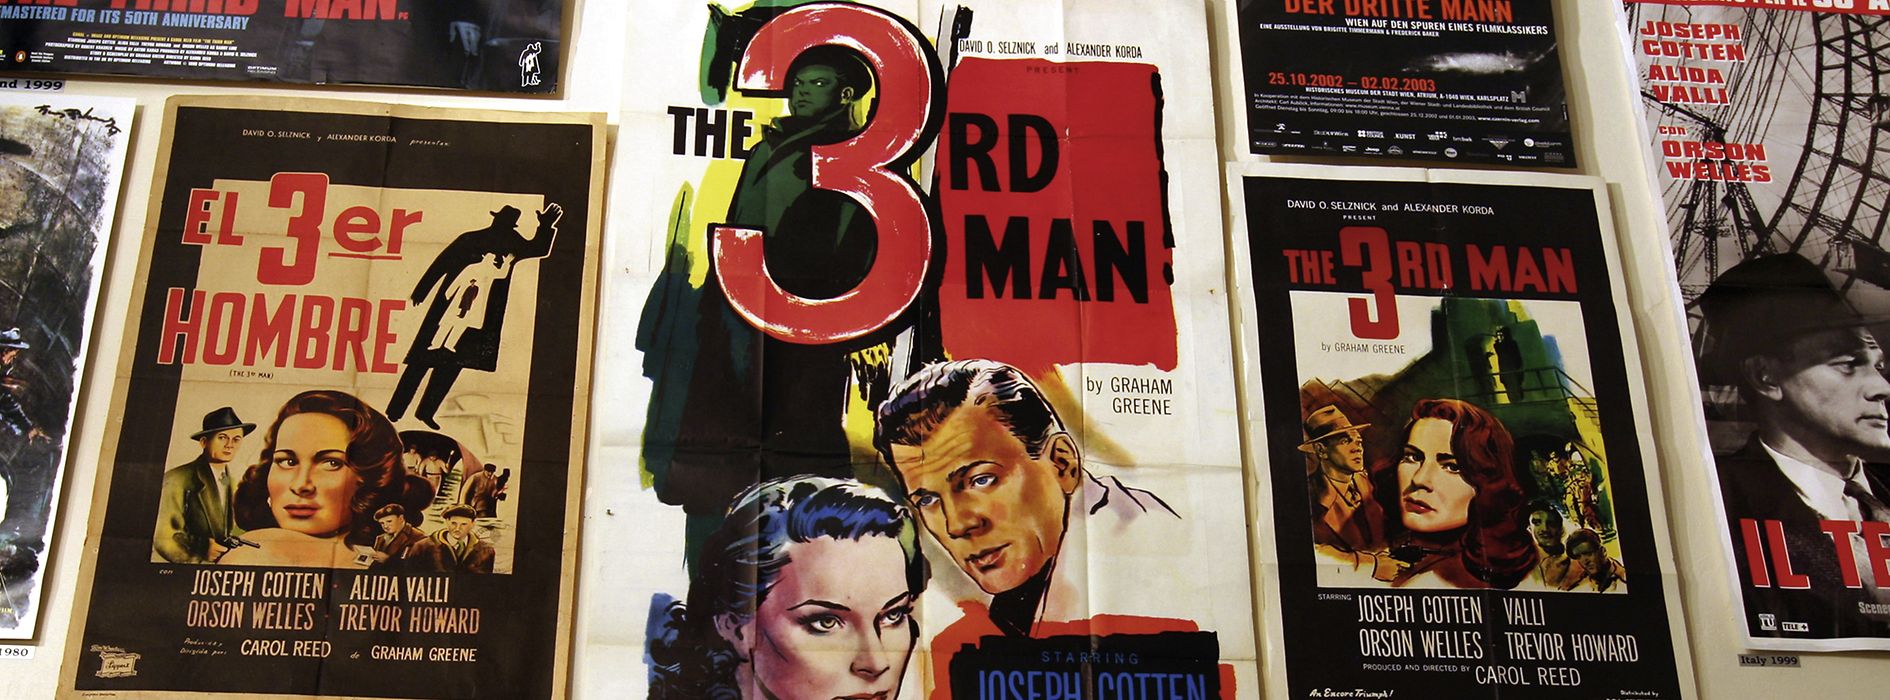 movie poster from The 3rd Man